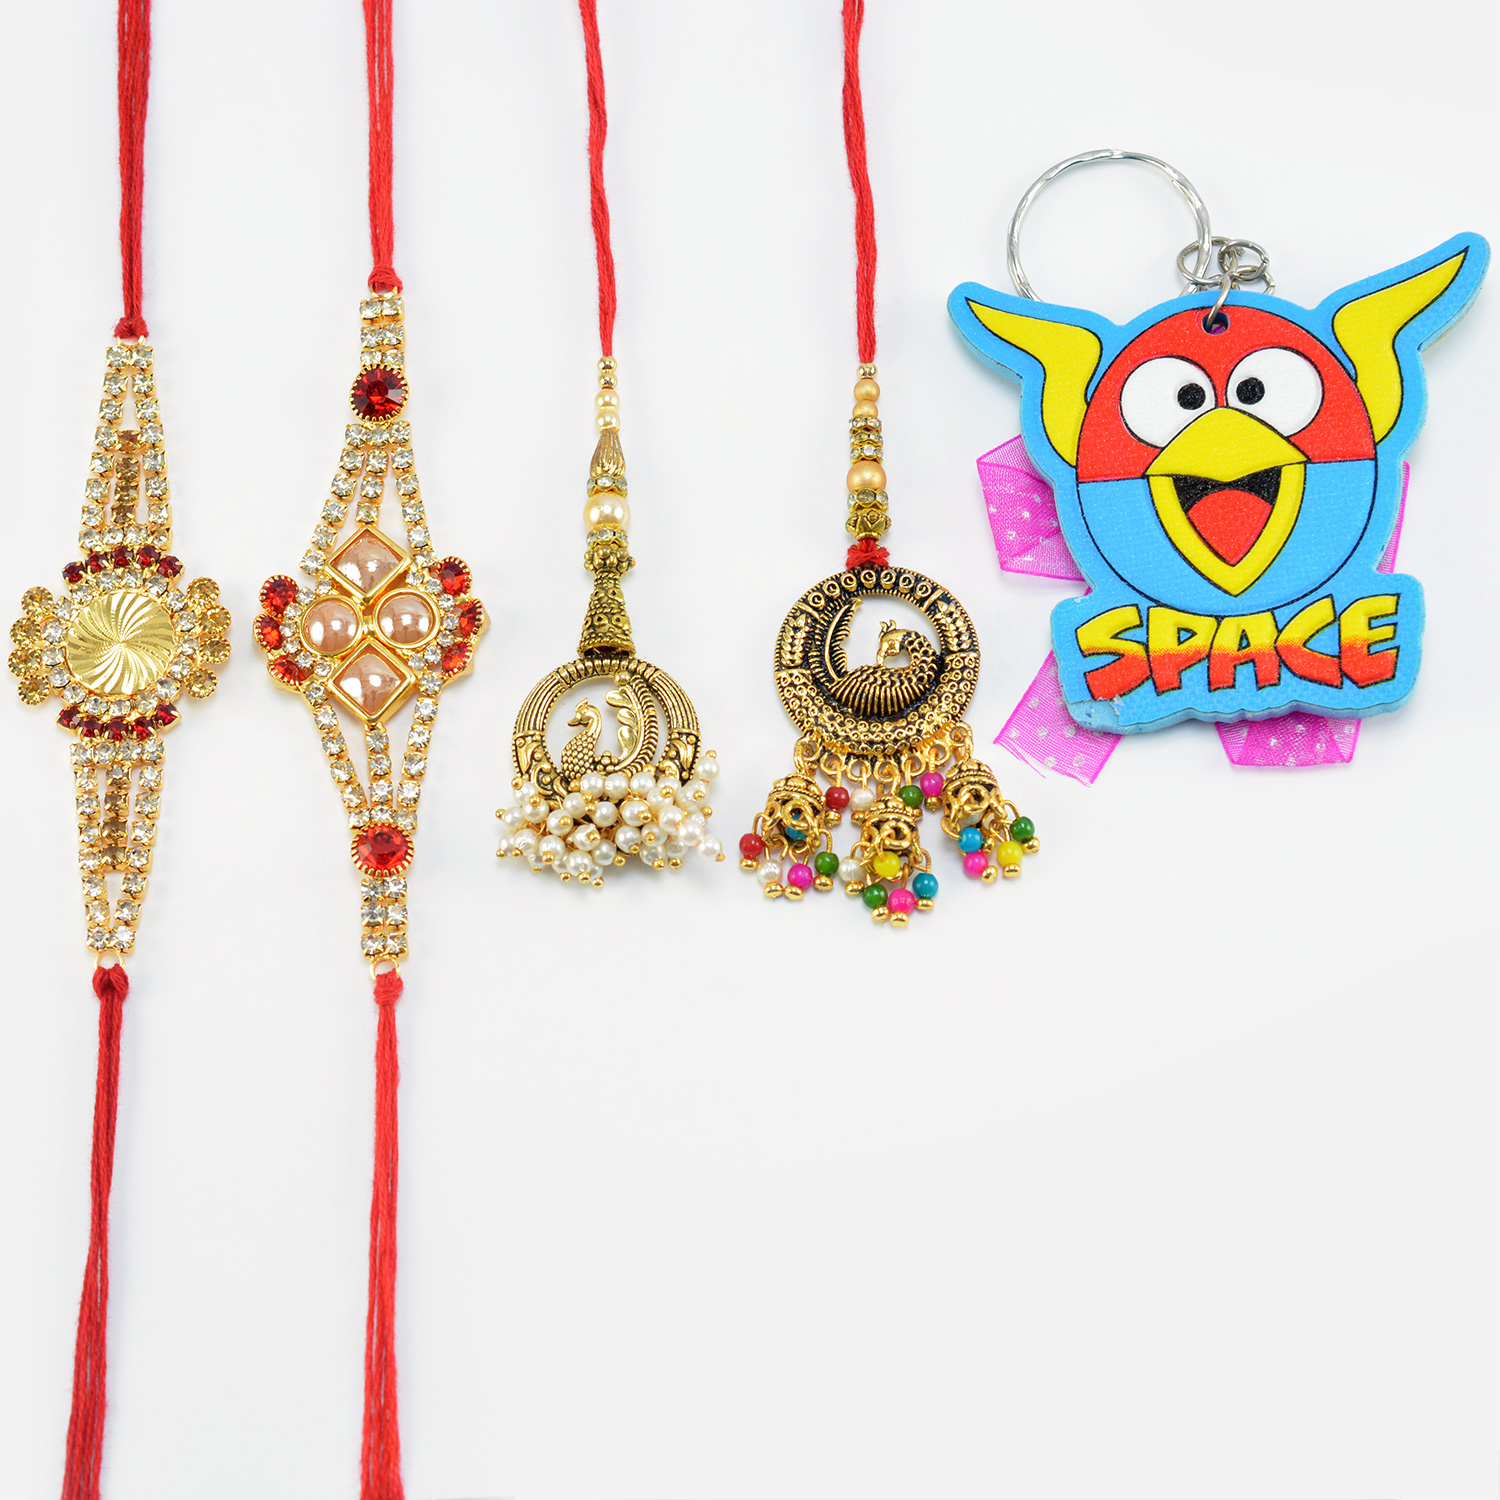 Jewel Stone Studded Two Brother Rakhis with Two Duck and Peacock Lumba Rakhi and Space Game Kid Rakhi Set of 5